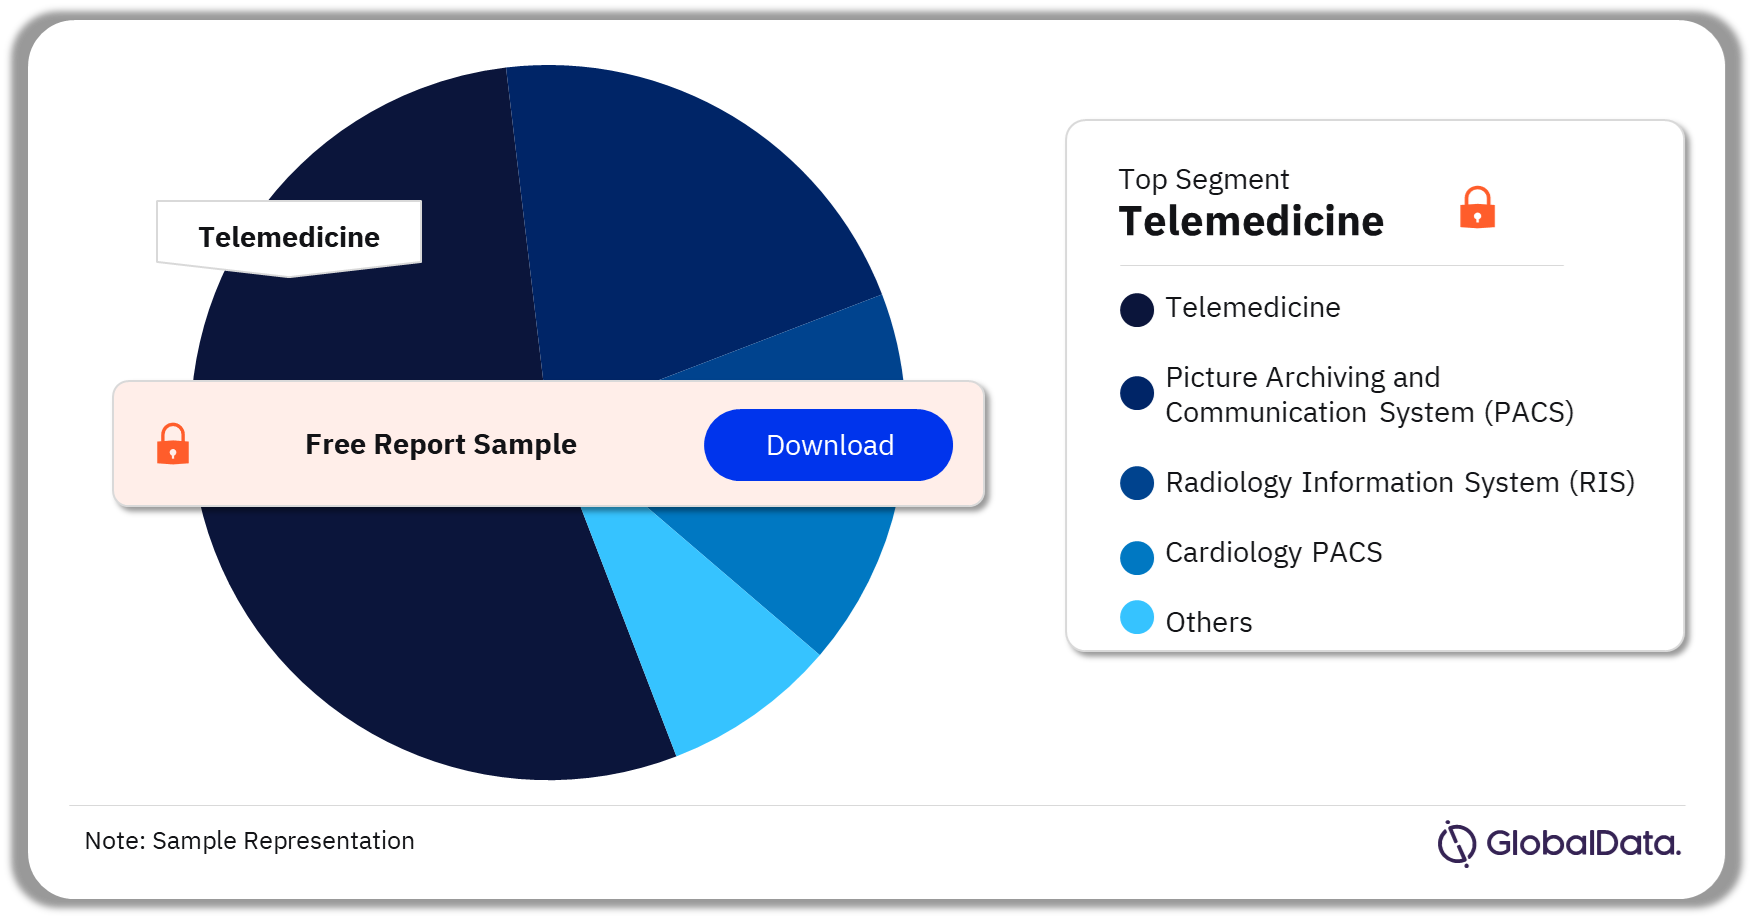 Medical Imaging Information Systems Pipeline Market Analysis by Segments, 2023 (%)